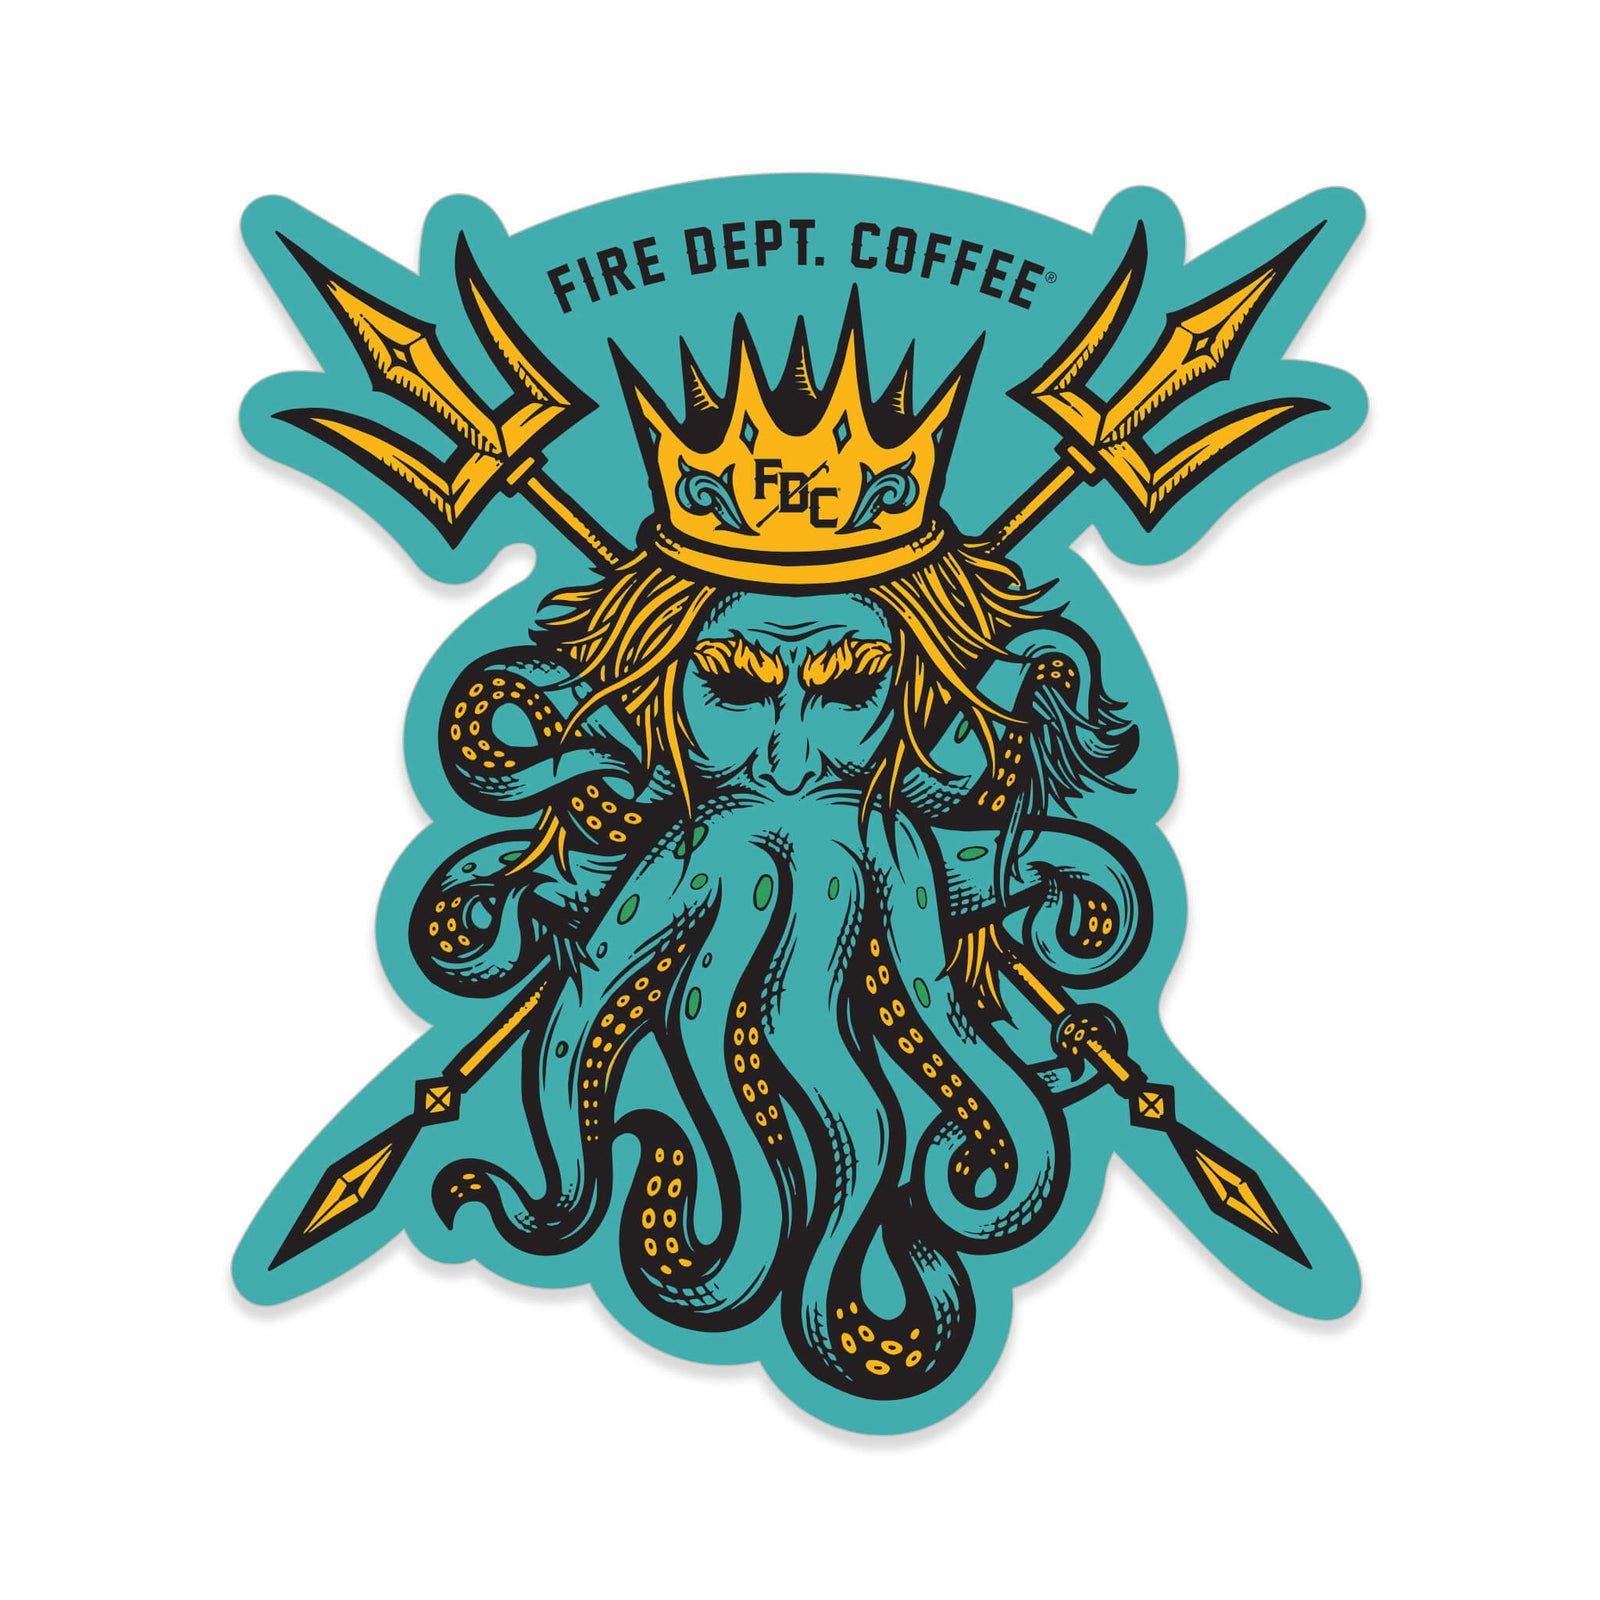 A sticker that features a King Neptune design and says "Fire Dept. Coffee" at the top. The still has an aqua background.